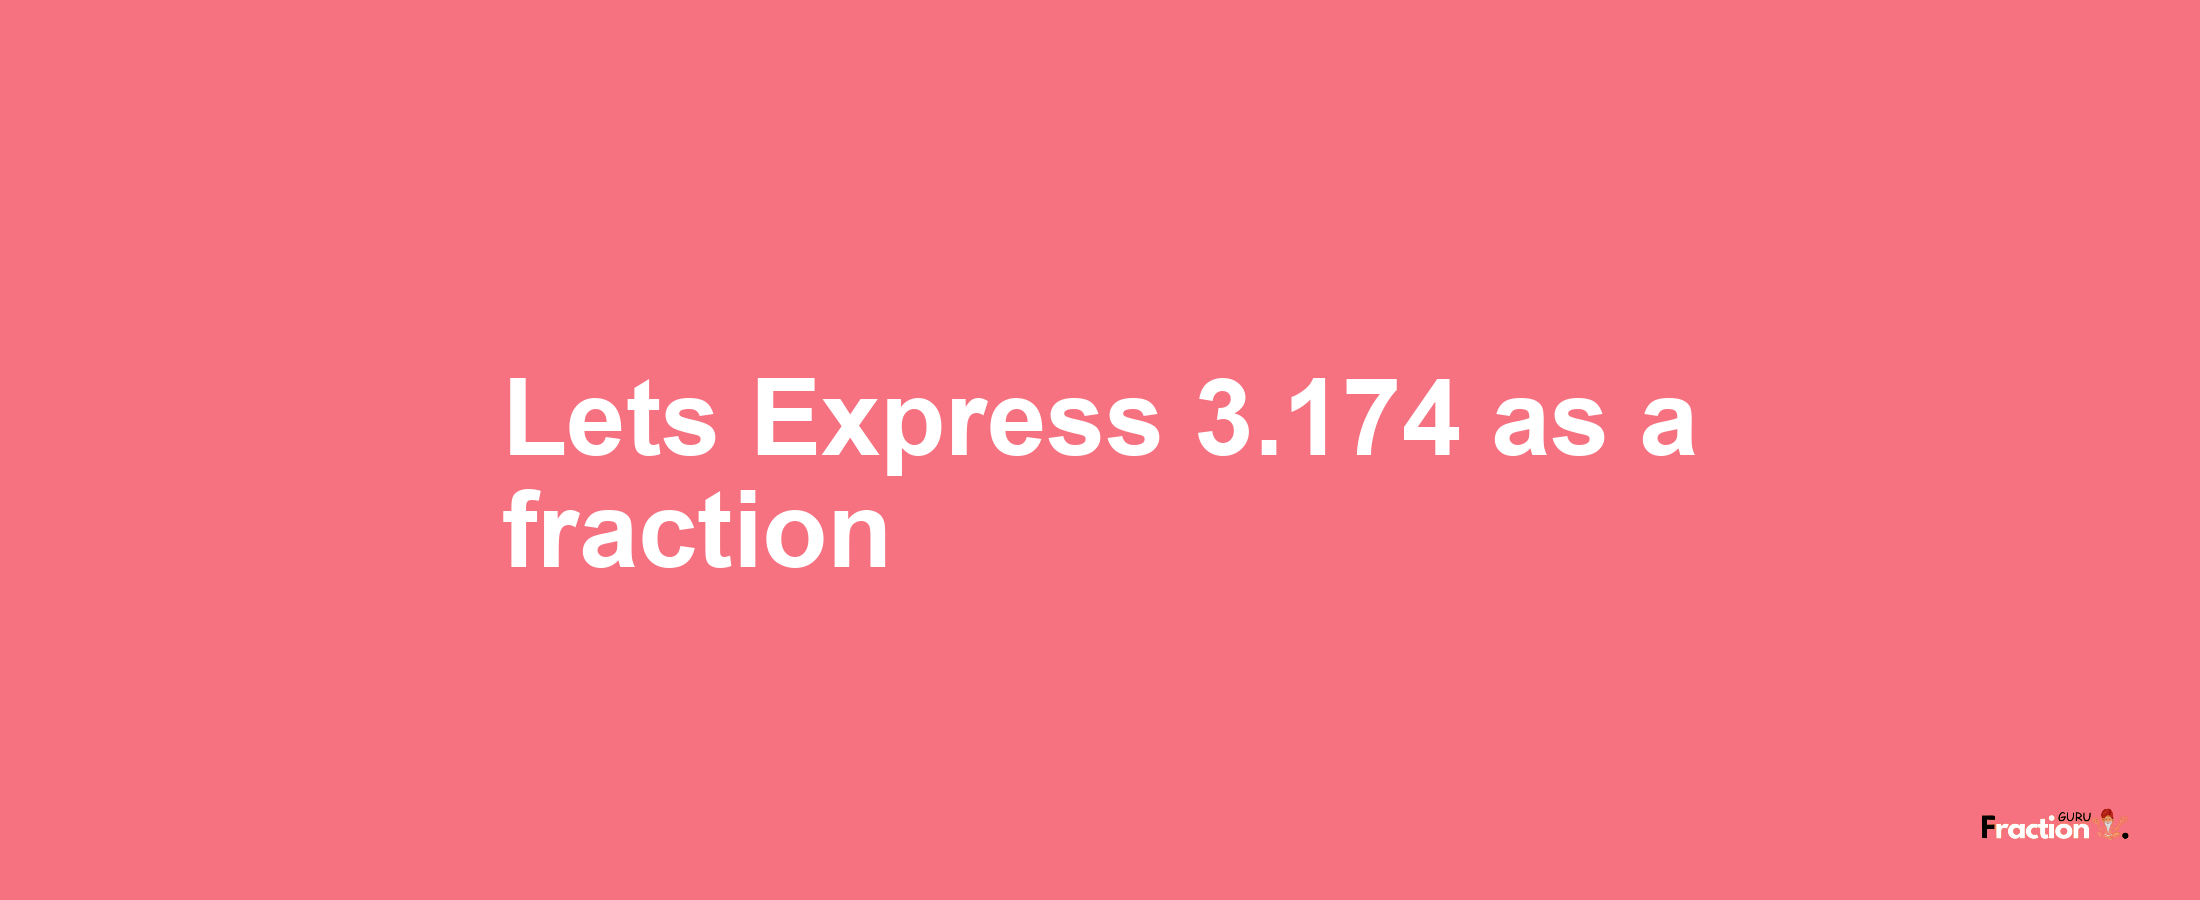 Lets Express 3.174 as afraction